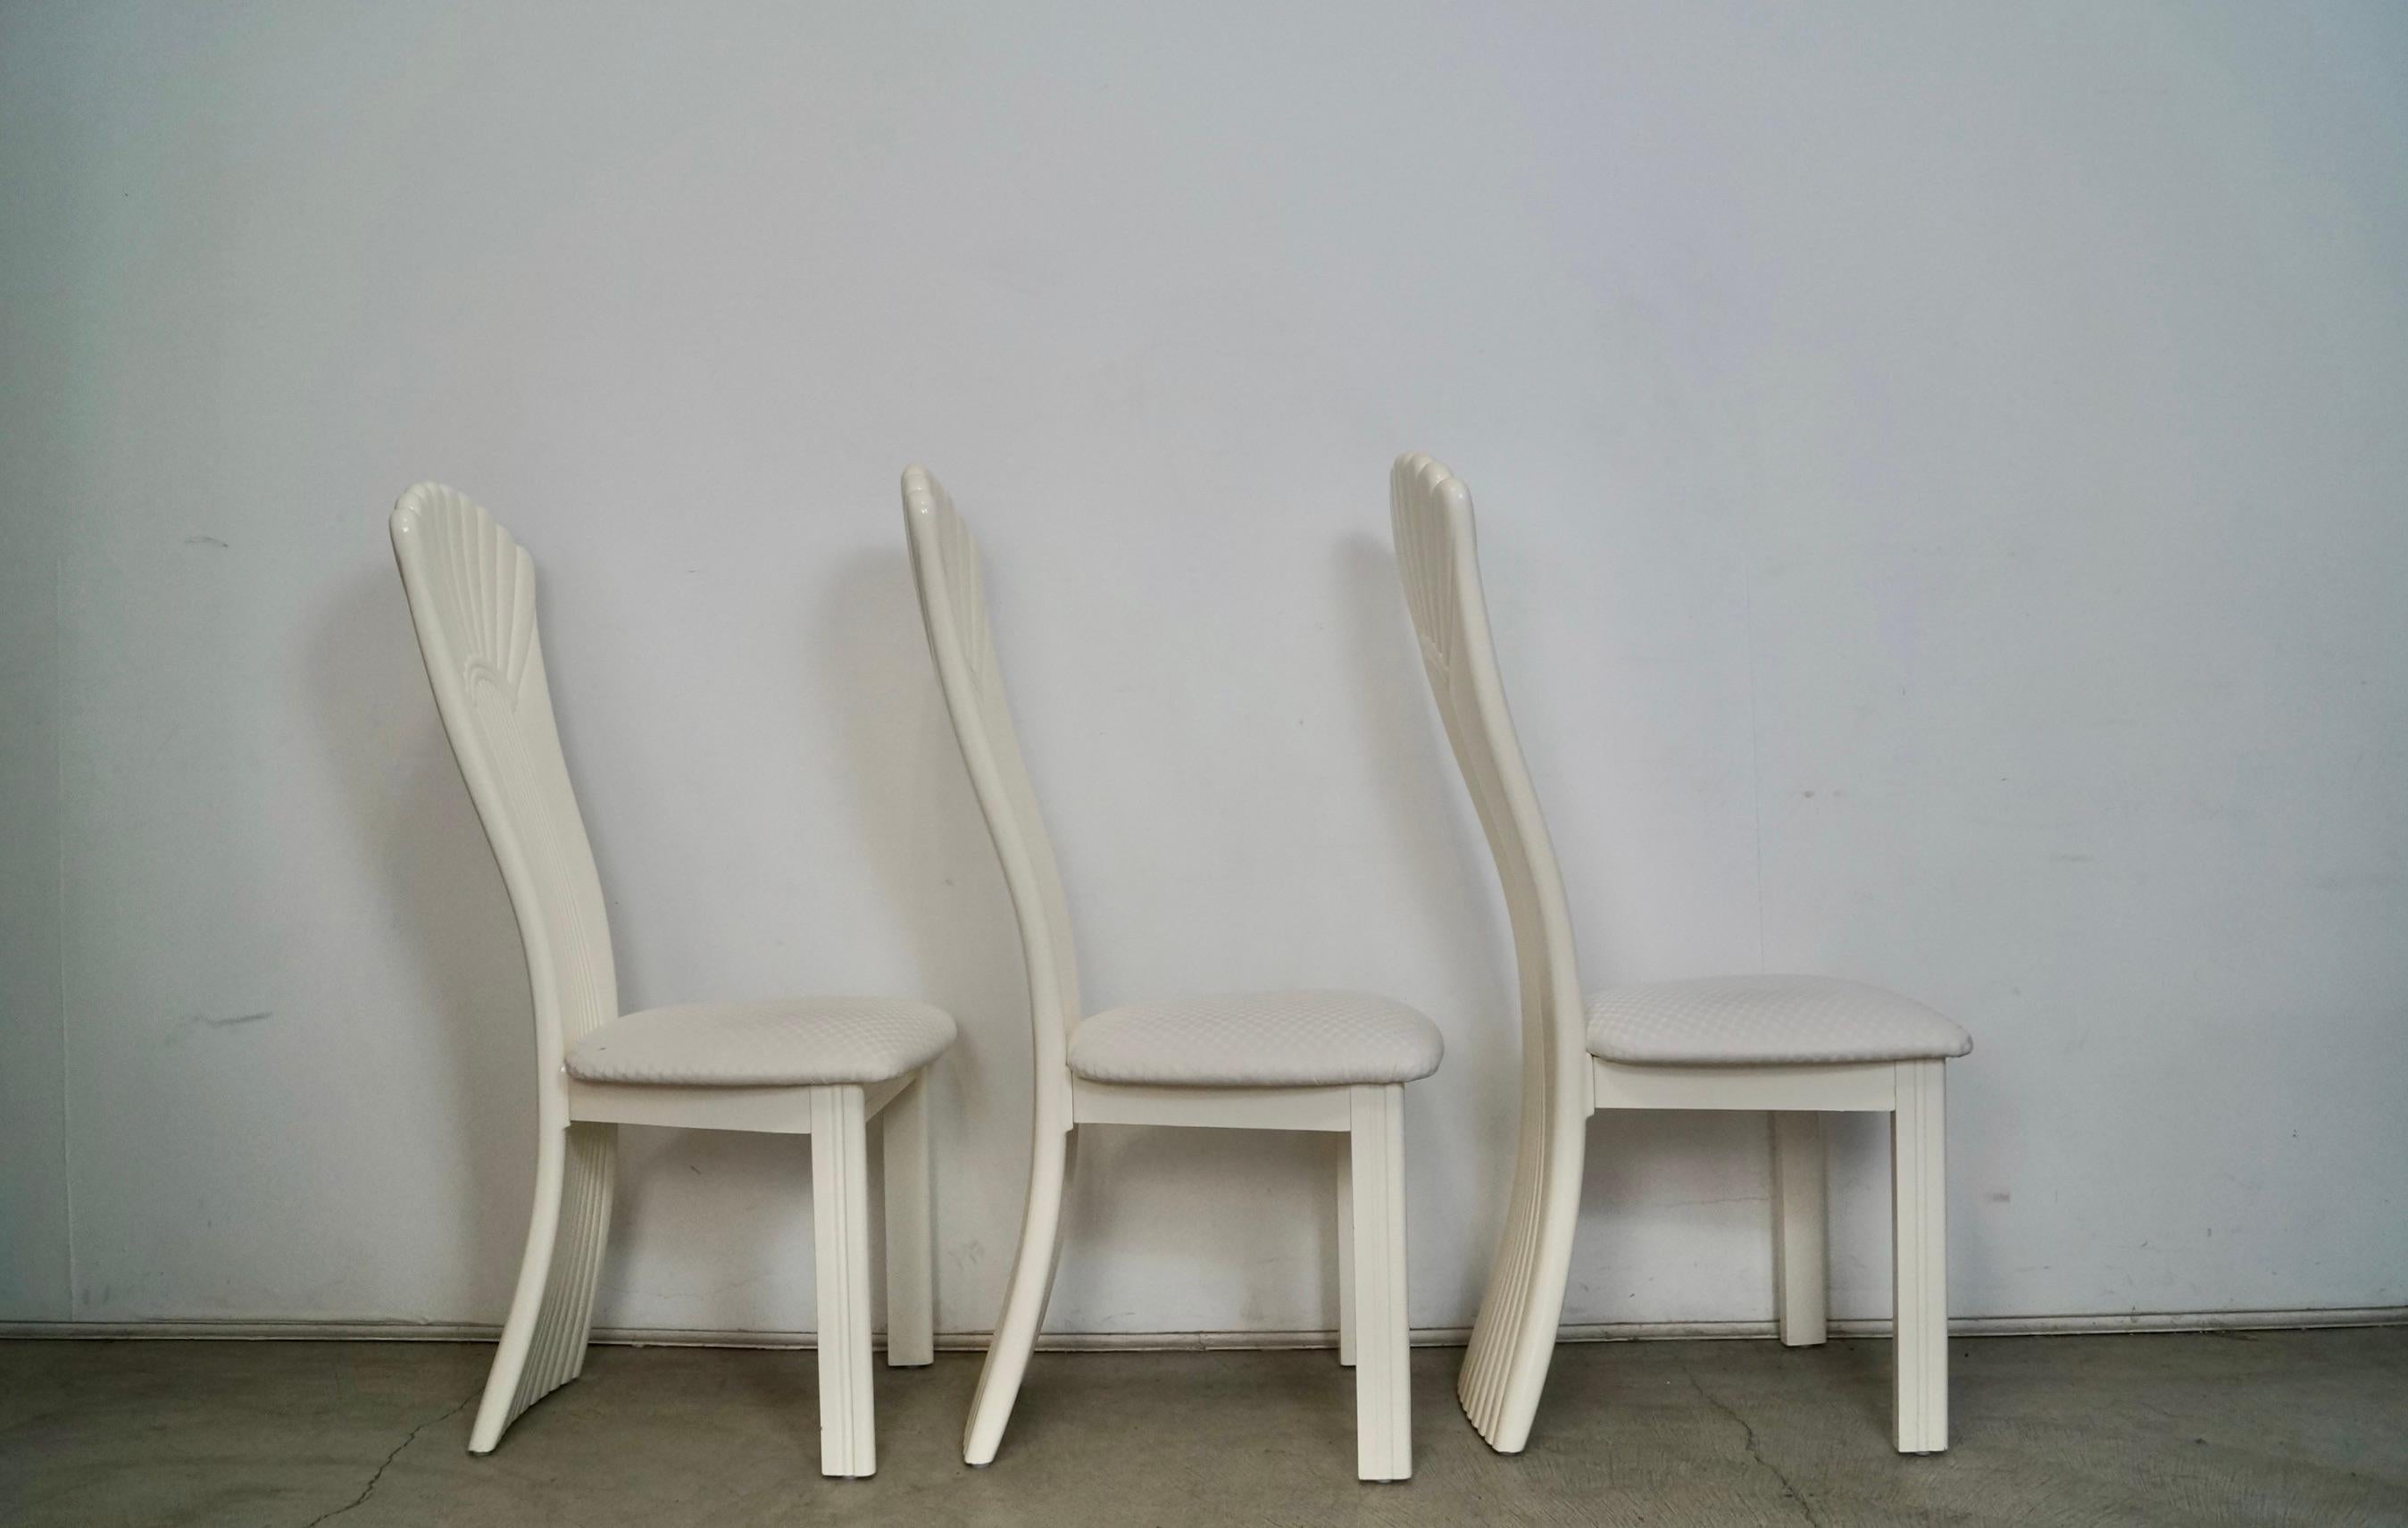 Late 20th Century 1980's Italian Postmodern Art Deco Najarian Dining Chairs - Set of 3 For Sale